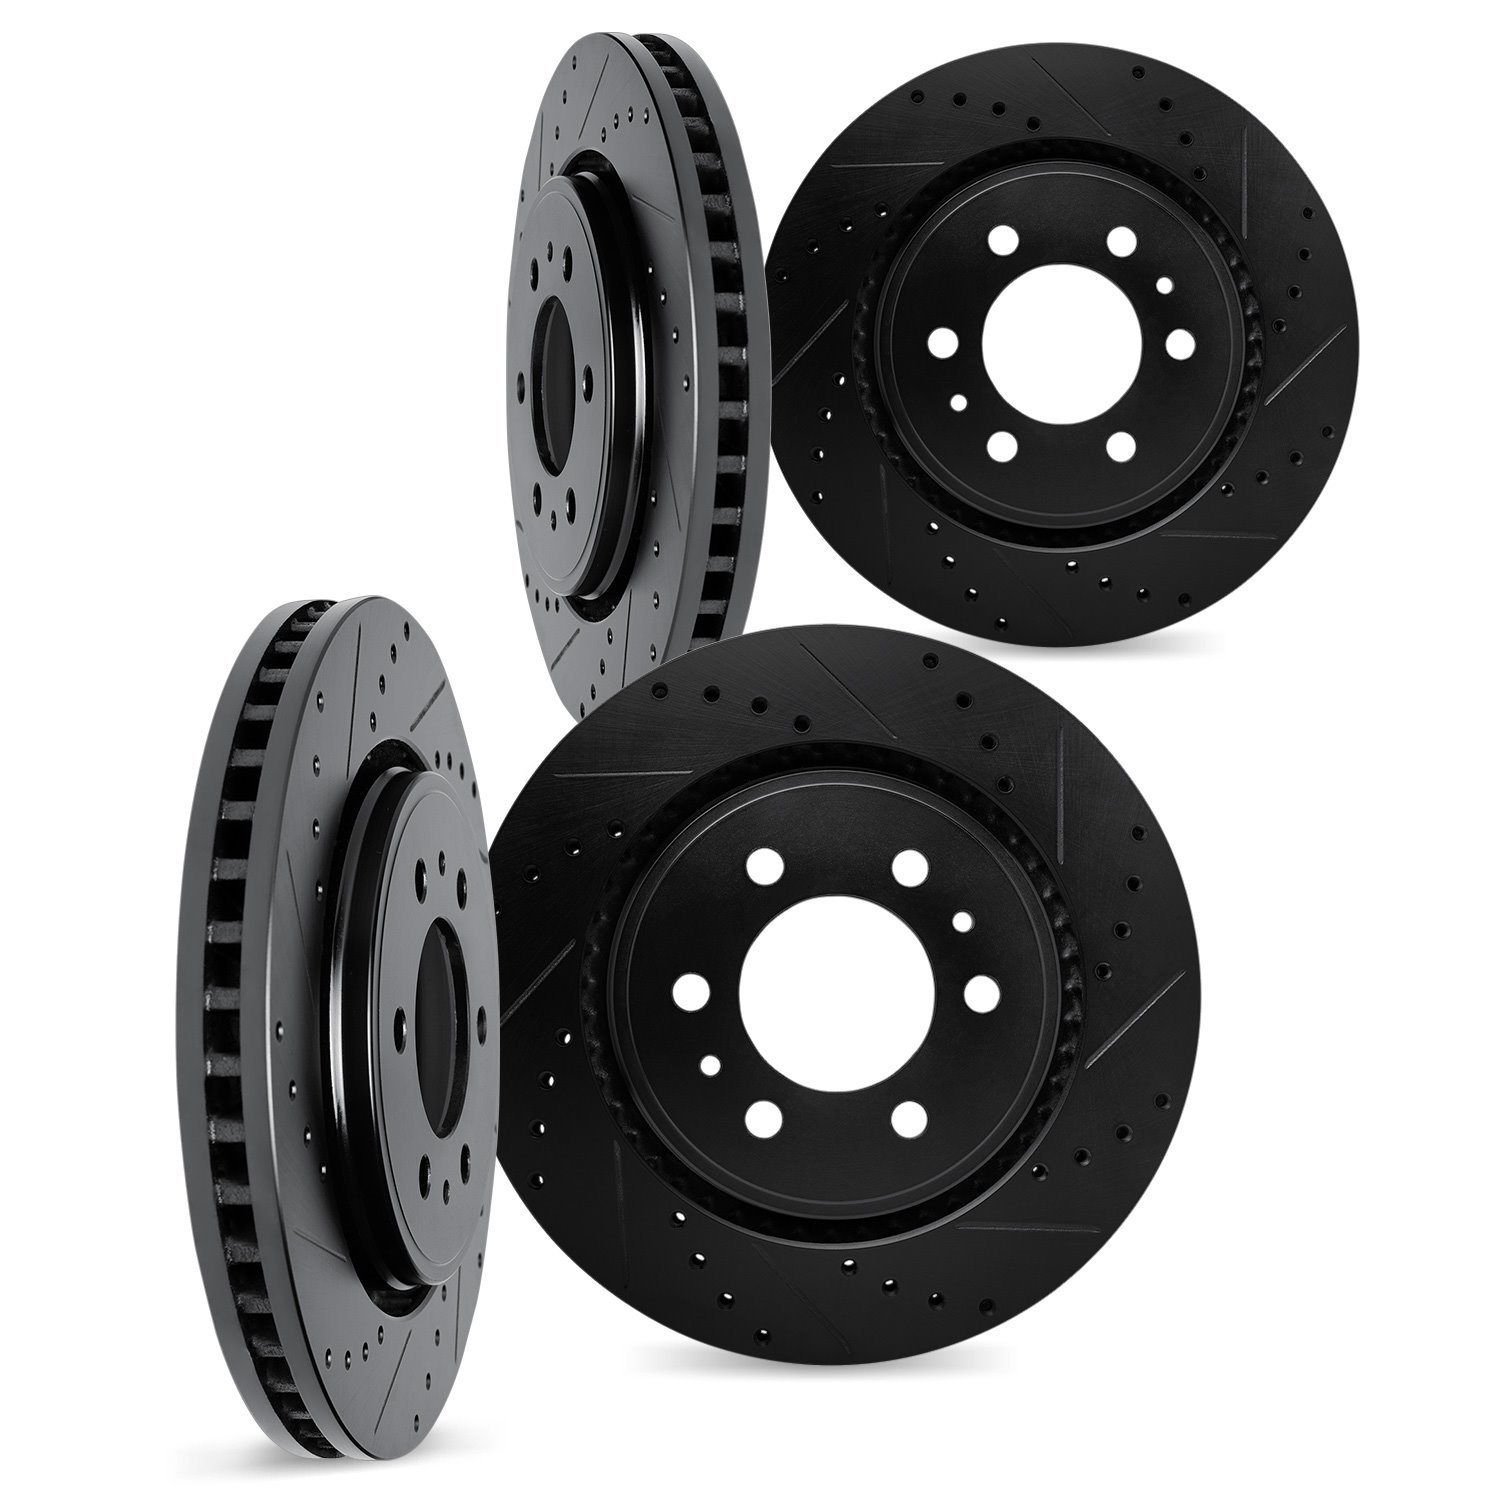 8004-47080 Drilled/Slotted Brake Rotors [Black], Fits Select GM, Position: Front and Rear